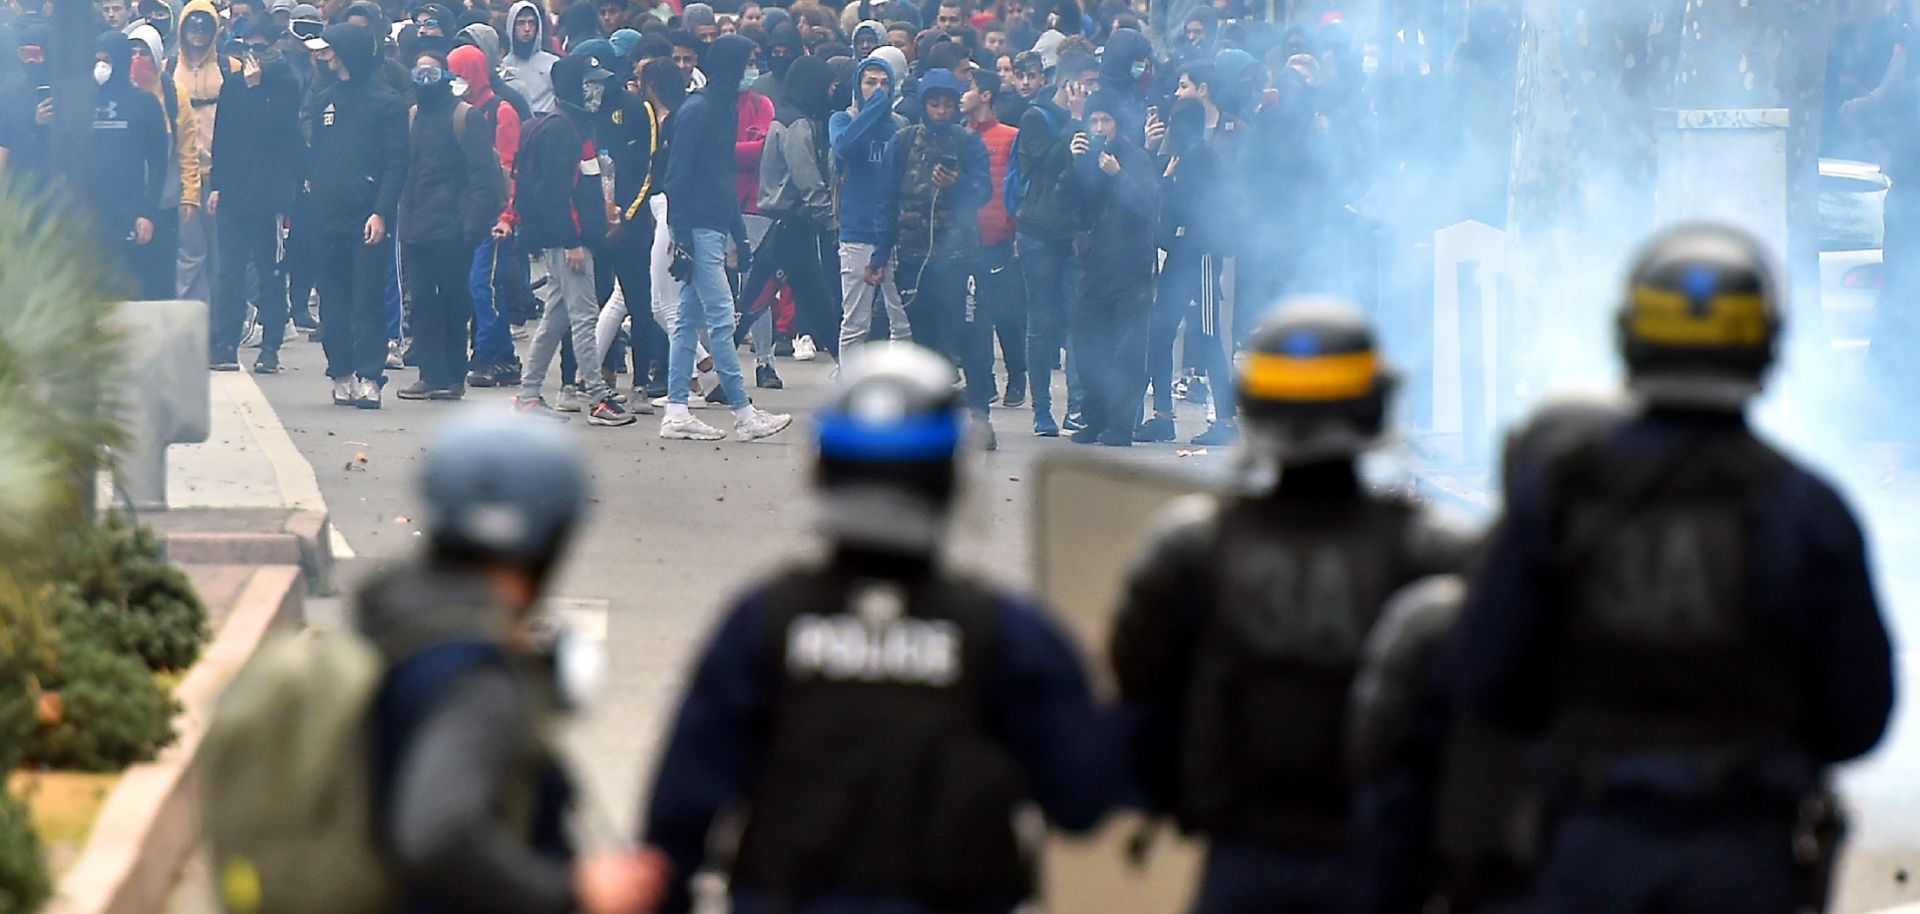 Protesters face riot police on Dec. 7, 2018, in Toulouse, France.